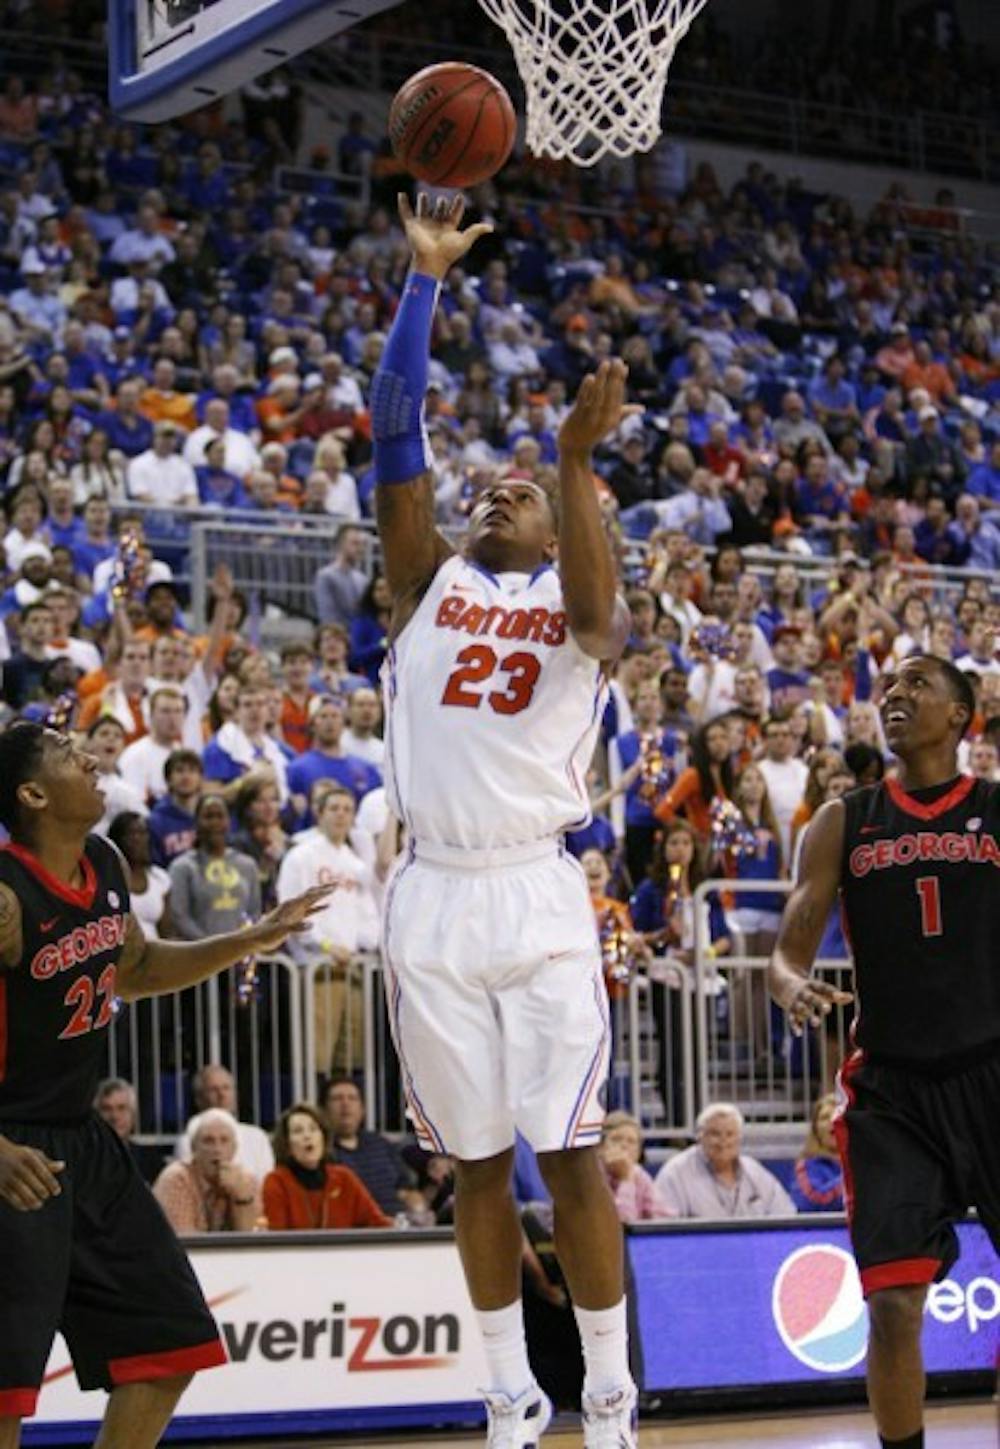 <p>Florida freshman guard Brad Beal scored 17 points on a 4-of-6 shooting performance from three in Tuesday’s win against UGA.</p>